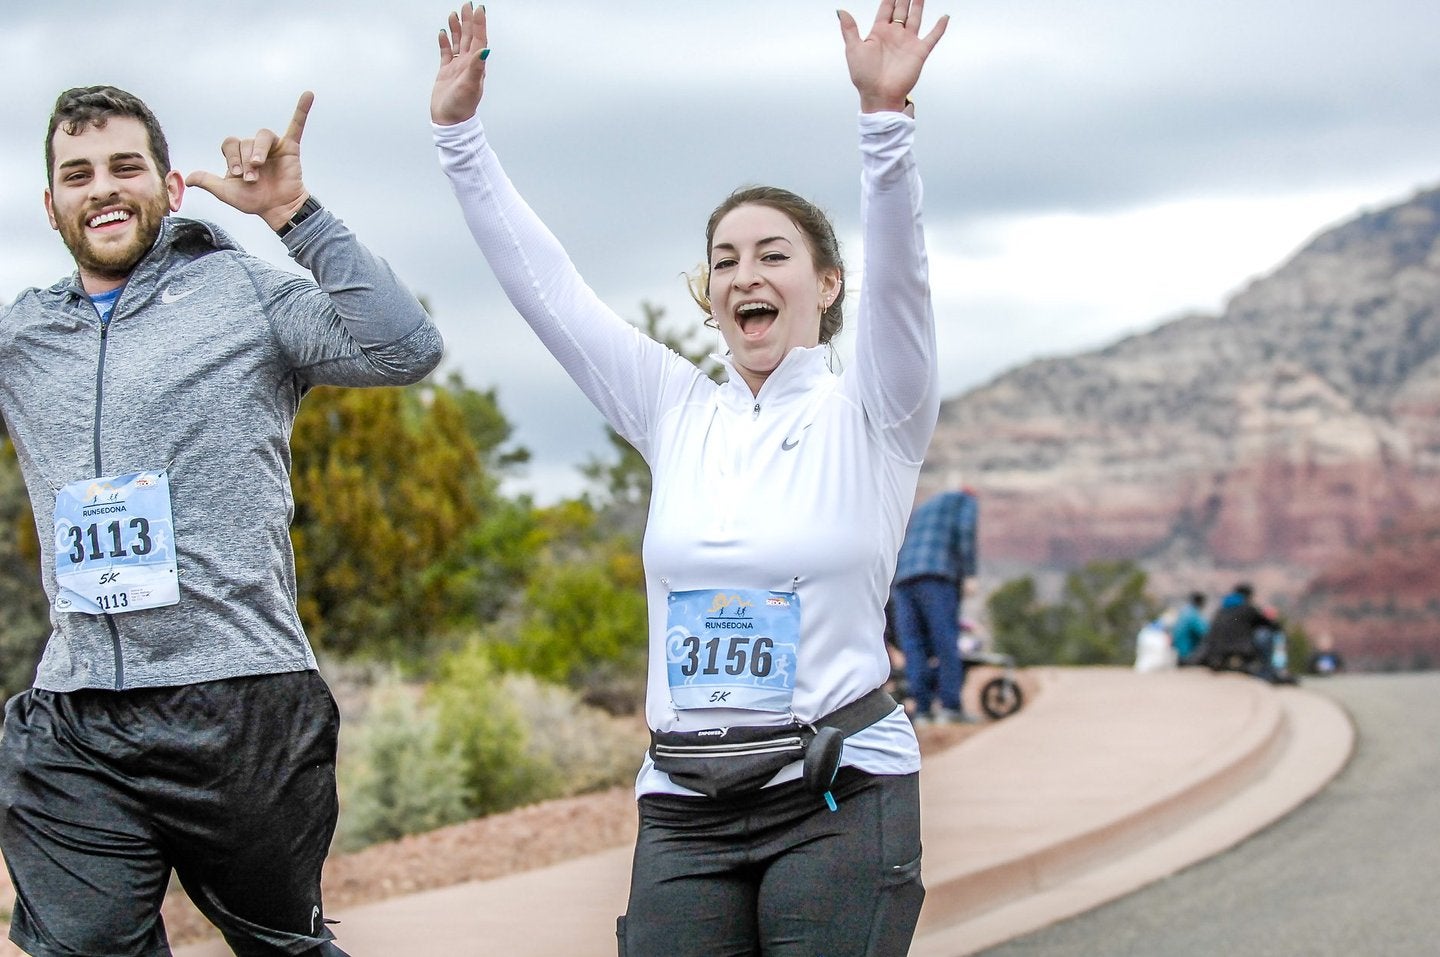 man and woman running in race excitedly